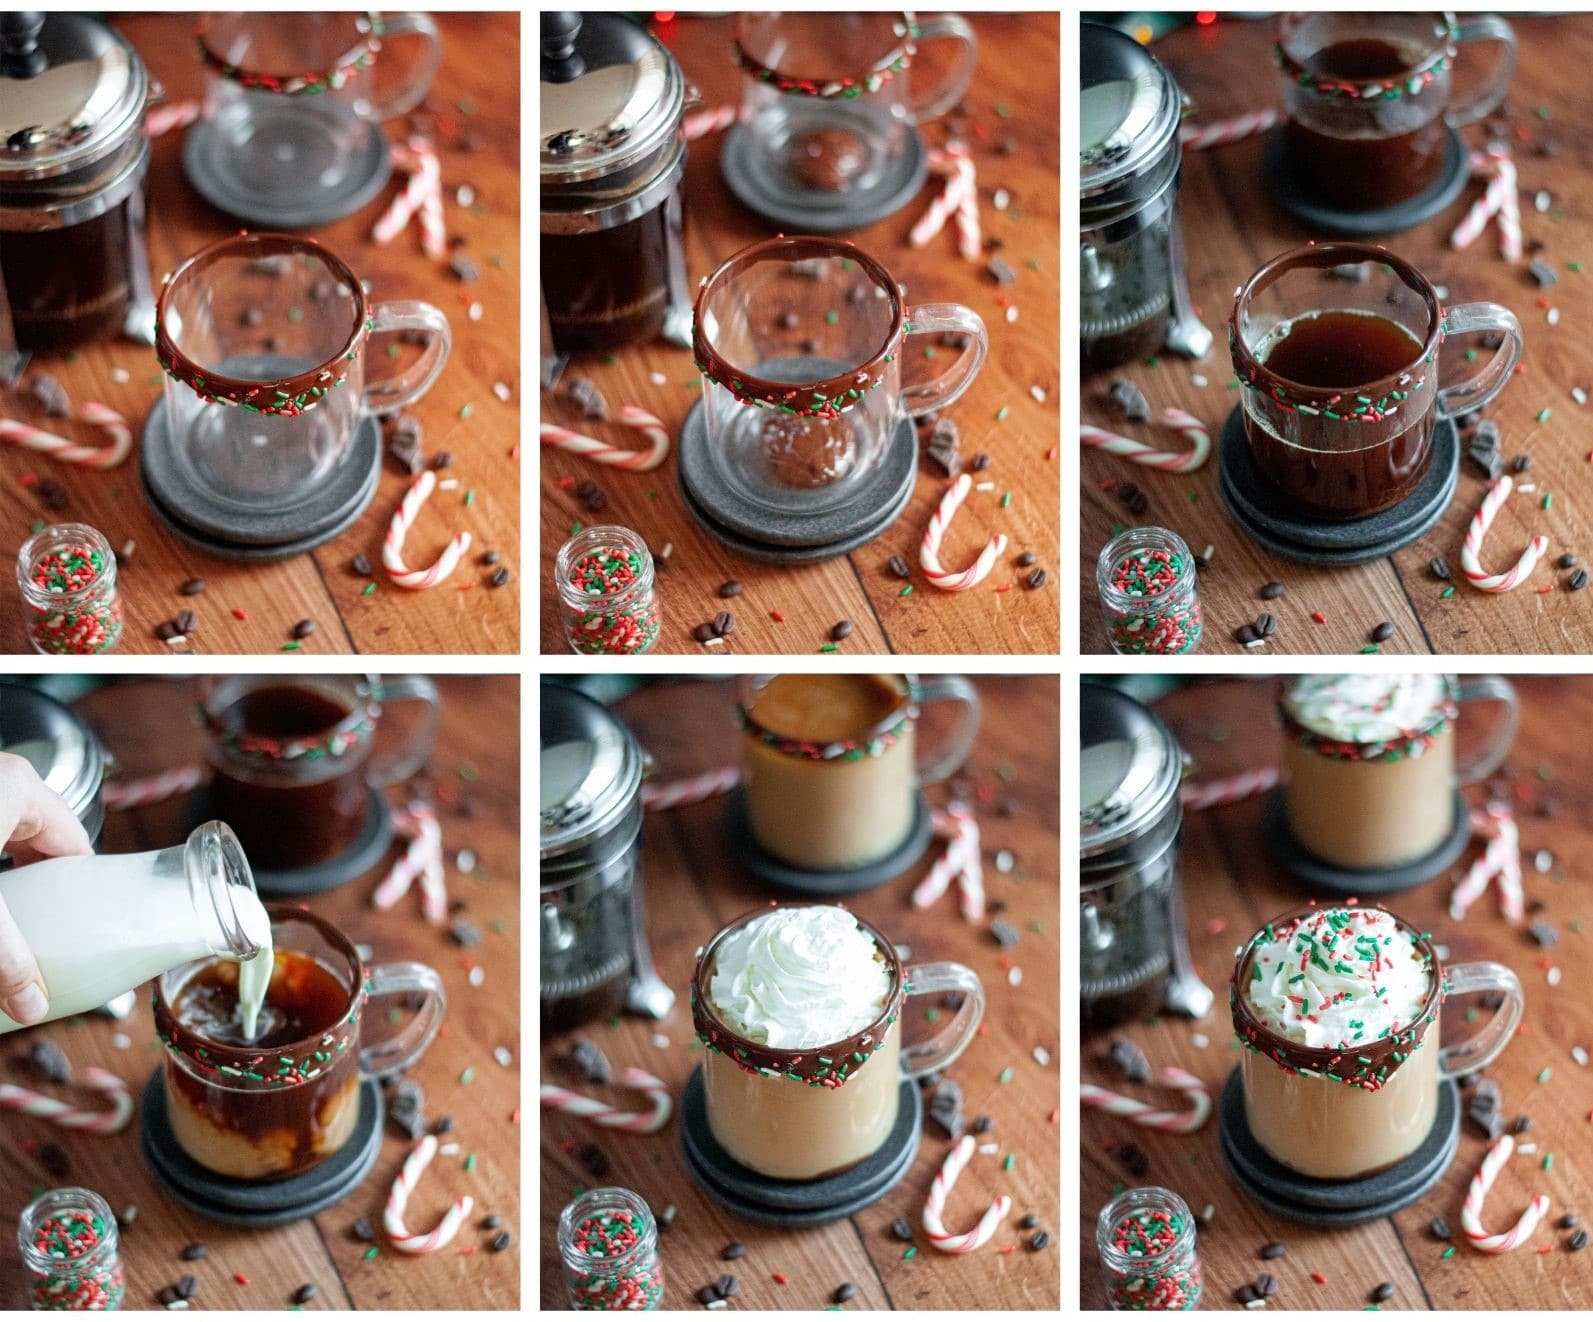 This is a collage of 6 images showing the process to make this festive alcoholic coffee drink with peppermint schnapps and Kahlua.